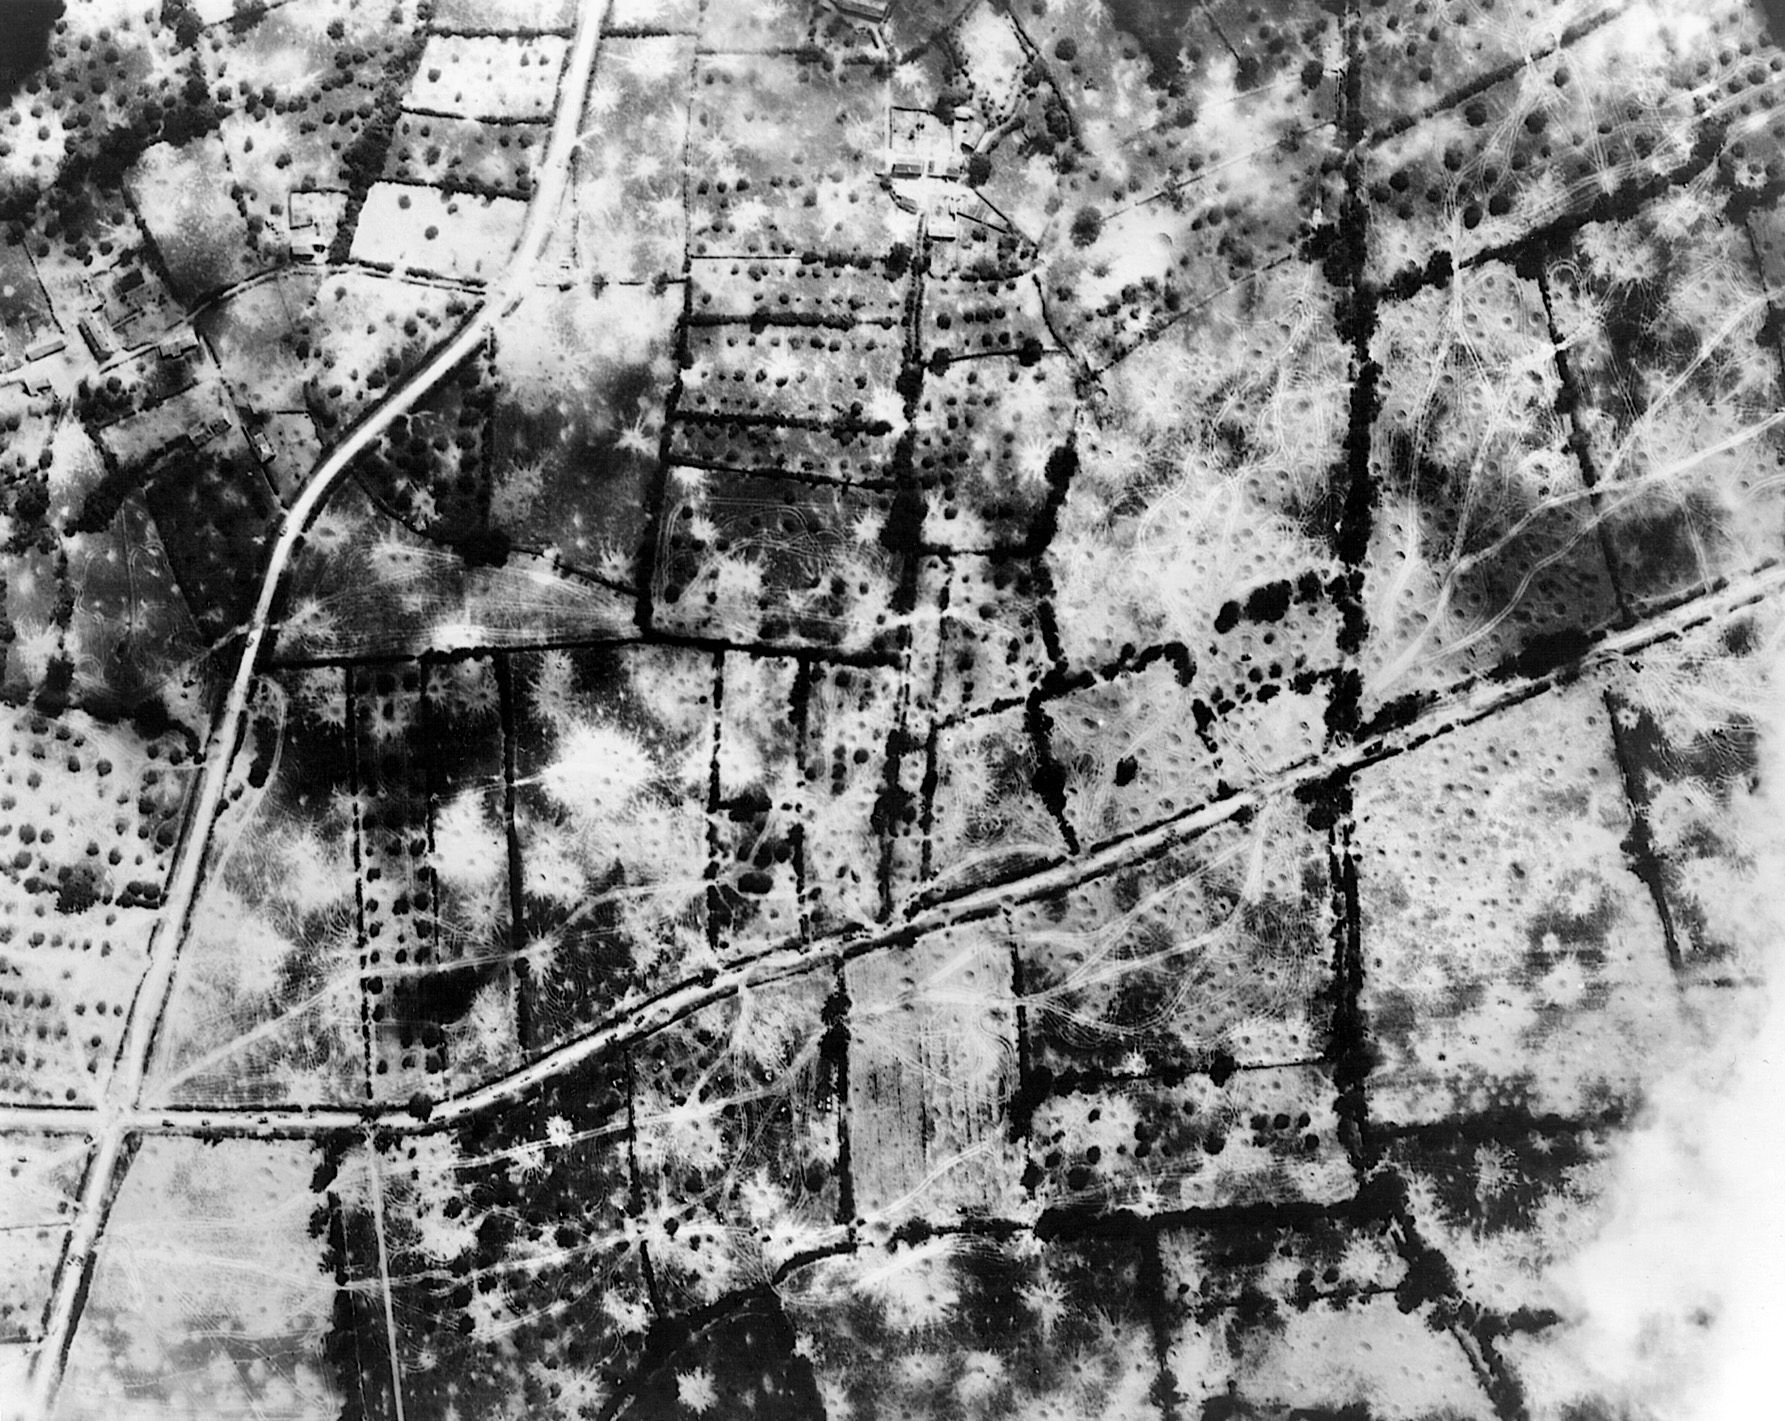 U.S. bomber crews inadvertently inflicted casualties on front-line U.S. troops when some of their bombs fell short during Operation Cobra; nevertheless, they shattered the German defenses.